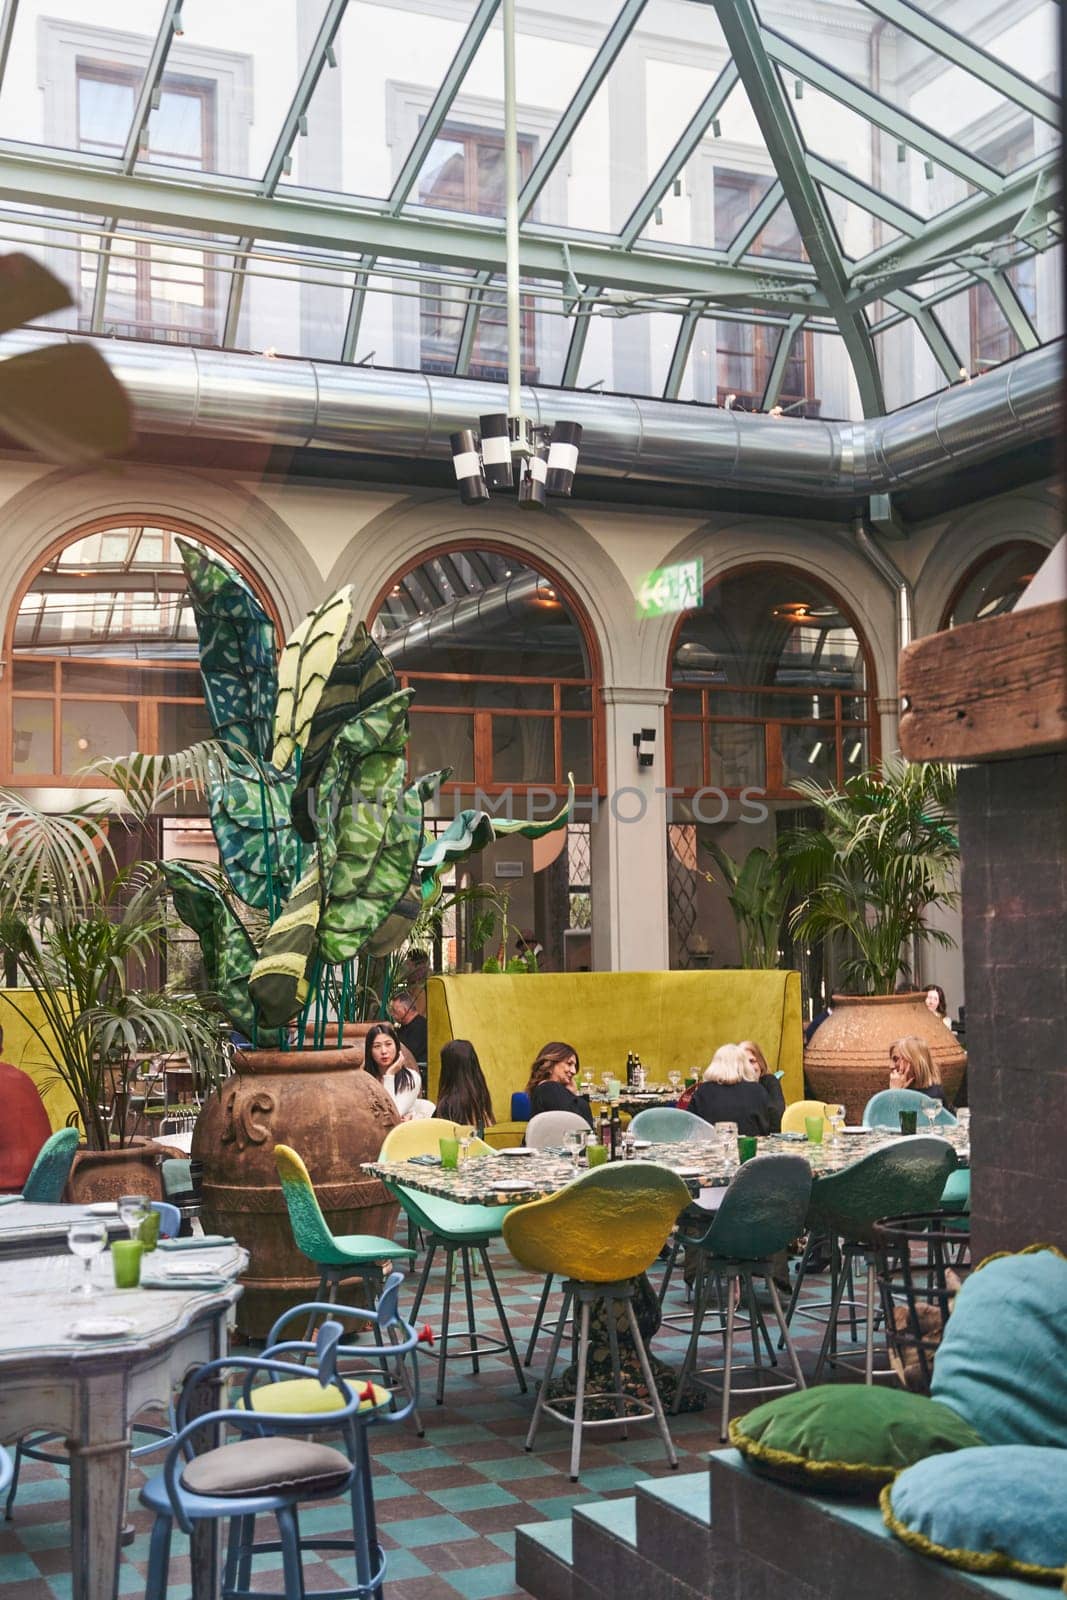 A restaurant featuring tables and chairs under a glass roof surrounded by lush houseplants and flowers, creating a cozy and inviting atmosphere